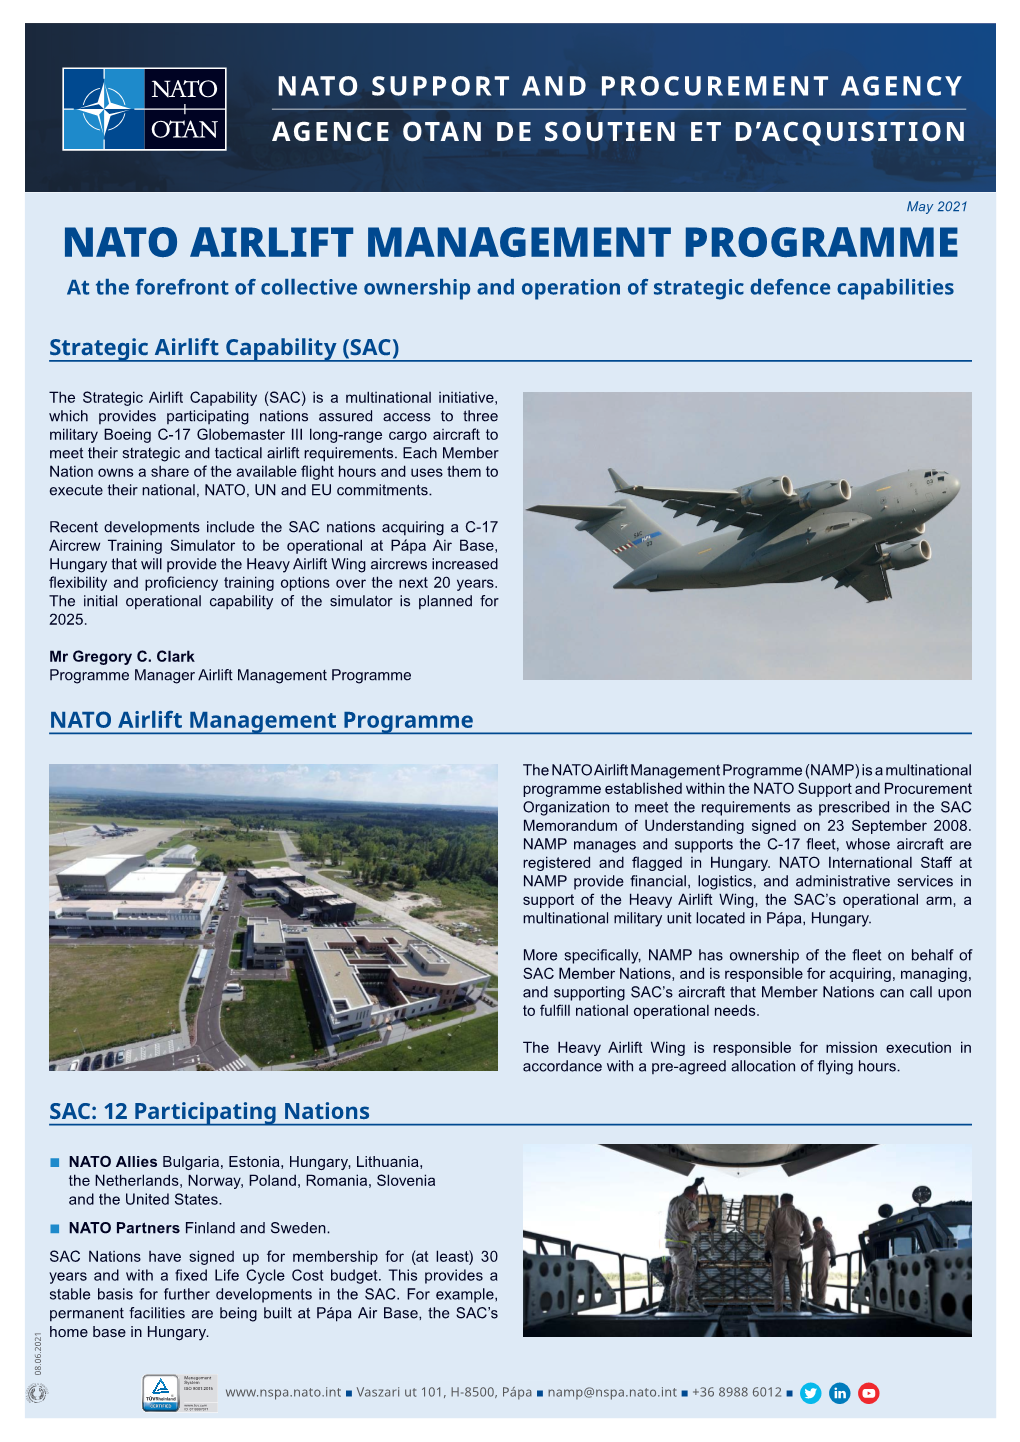 NATO AIRLIFT MANAGEMENT PROGRAMME at the Forefront of Collective Ownership and Operation of Strategic Defence Capabilities